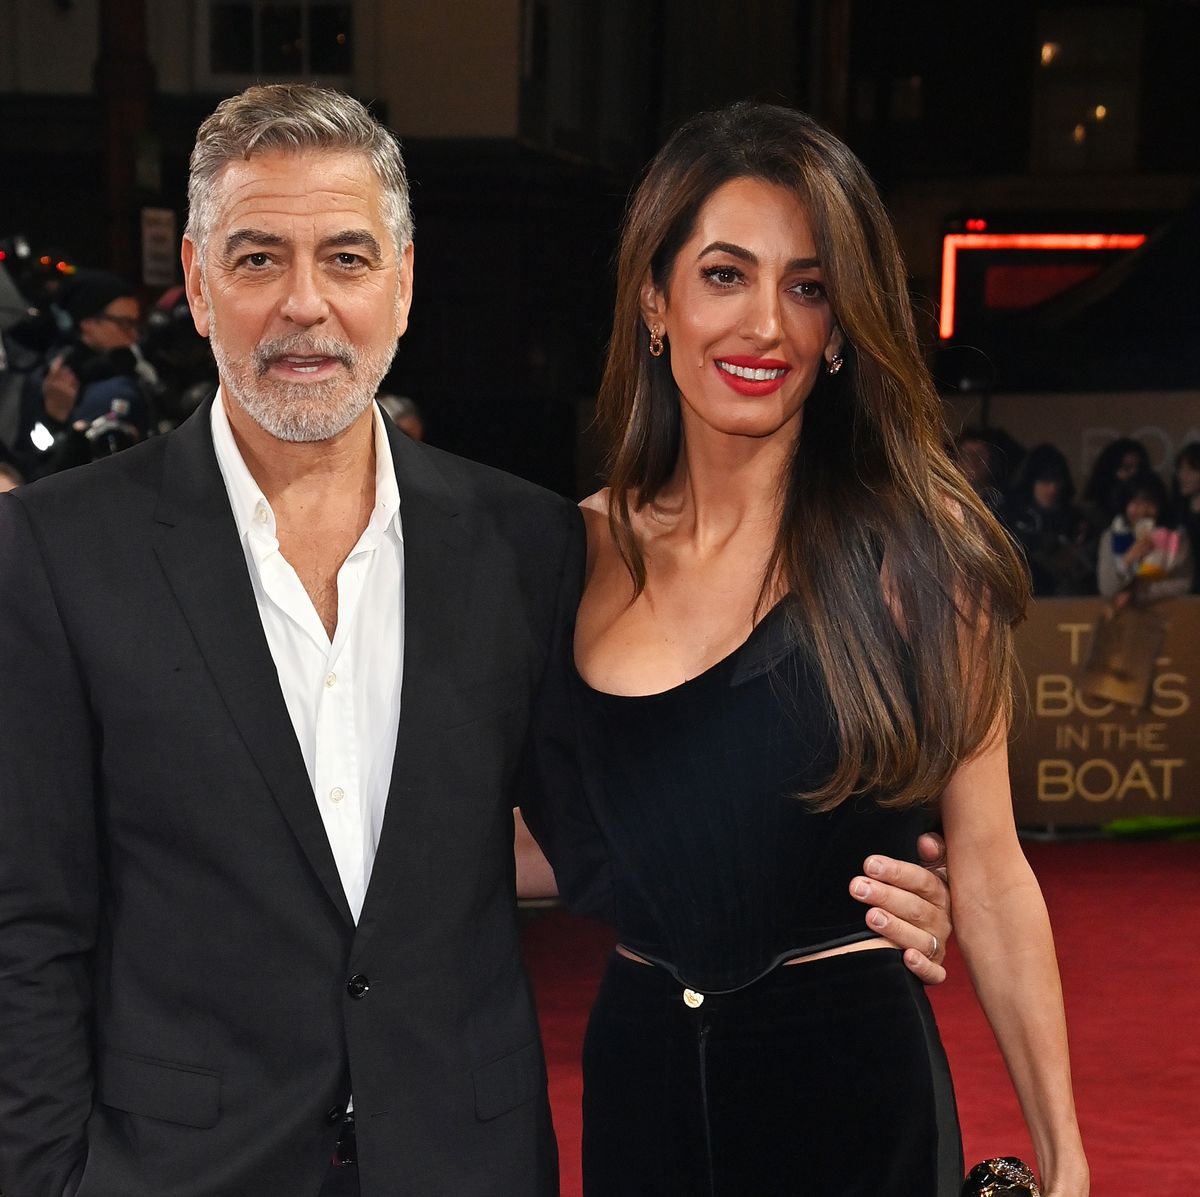 Amal Clooney Just Embraced The Corset Trend In The Most Elegant